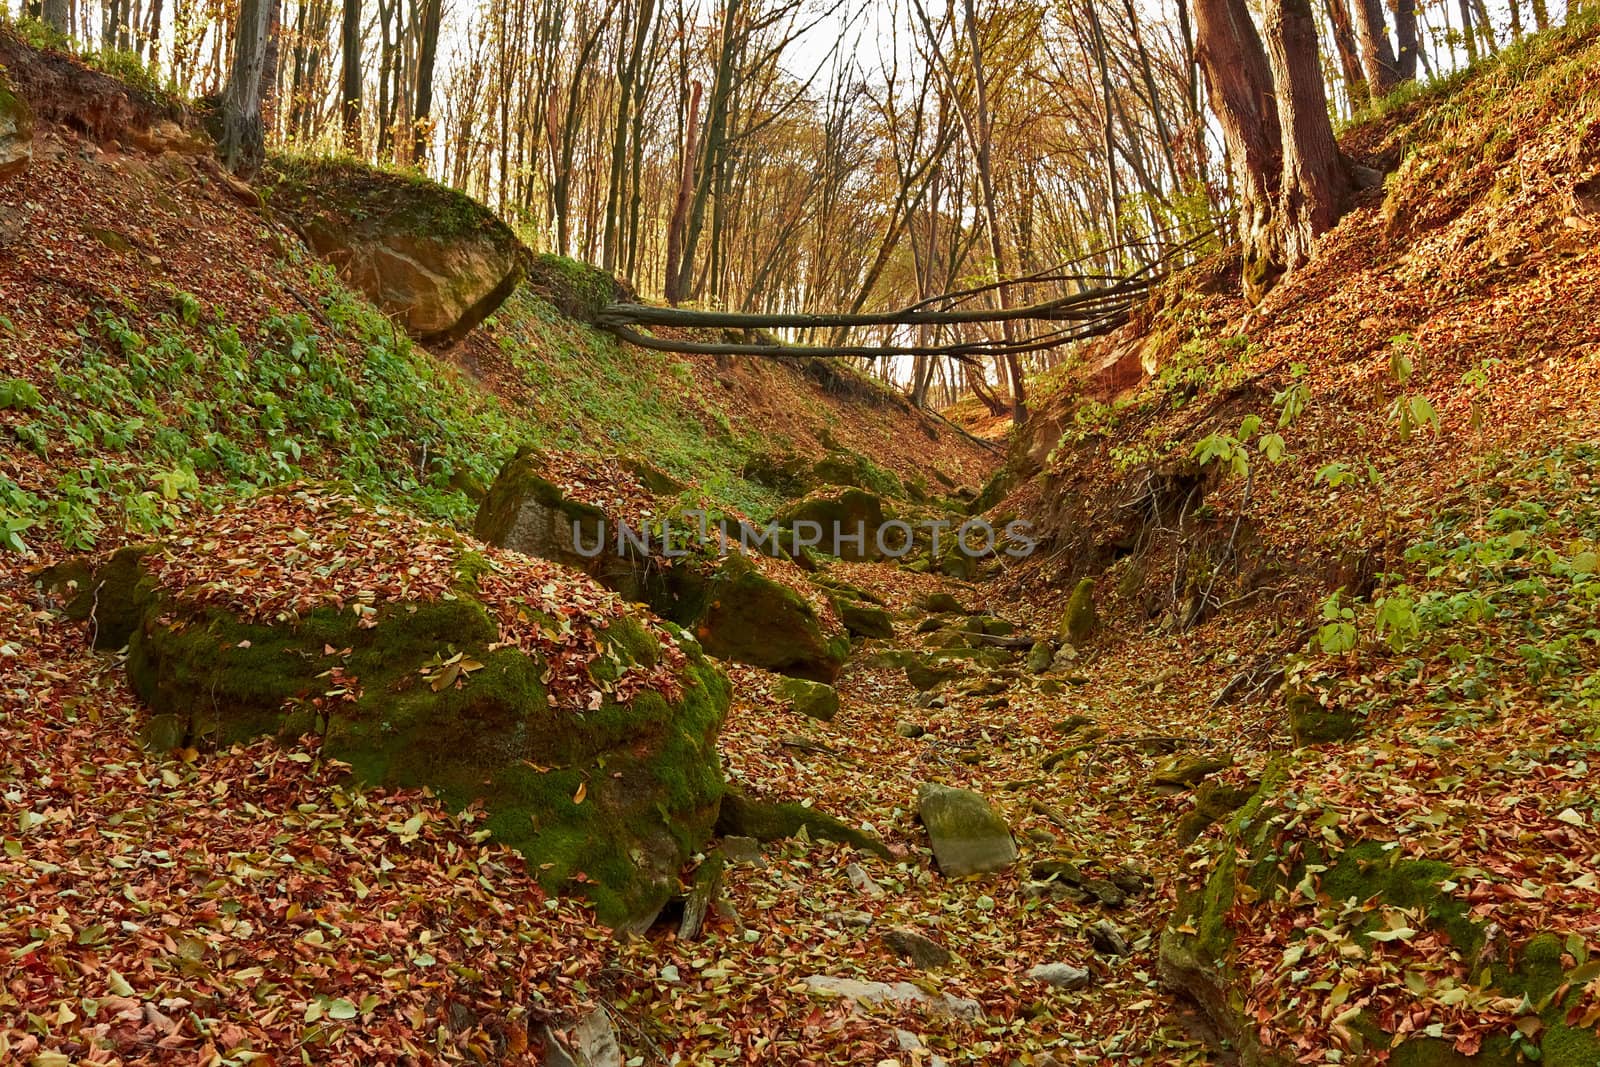 Ravine in the forest. Limestones covered with green moss among the fallen leaves. Falling tree through the gully